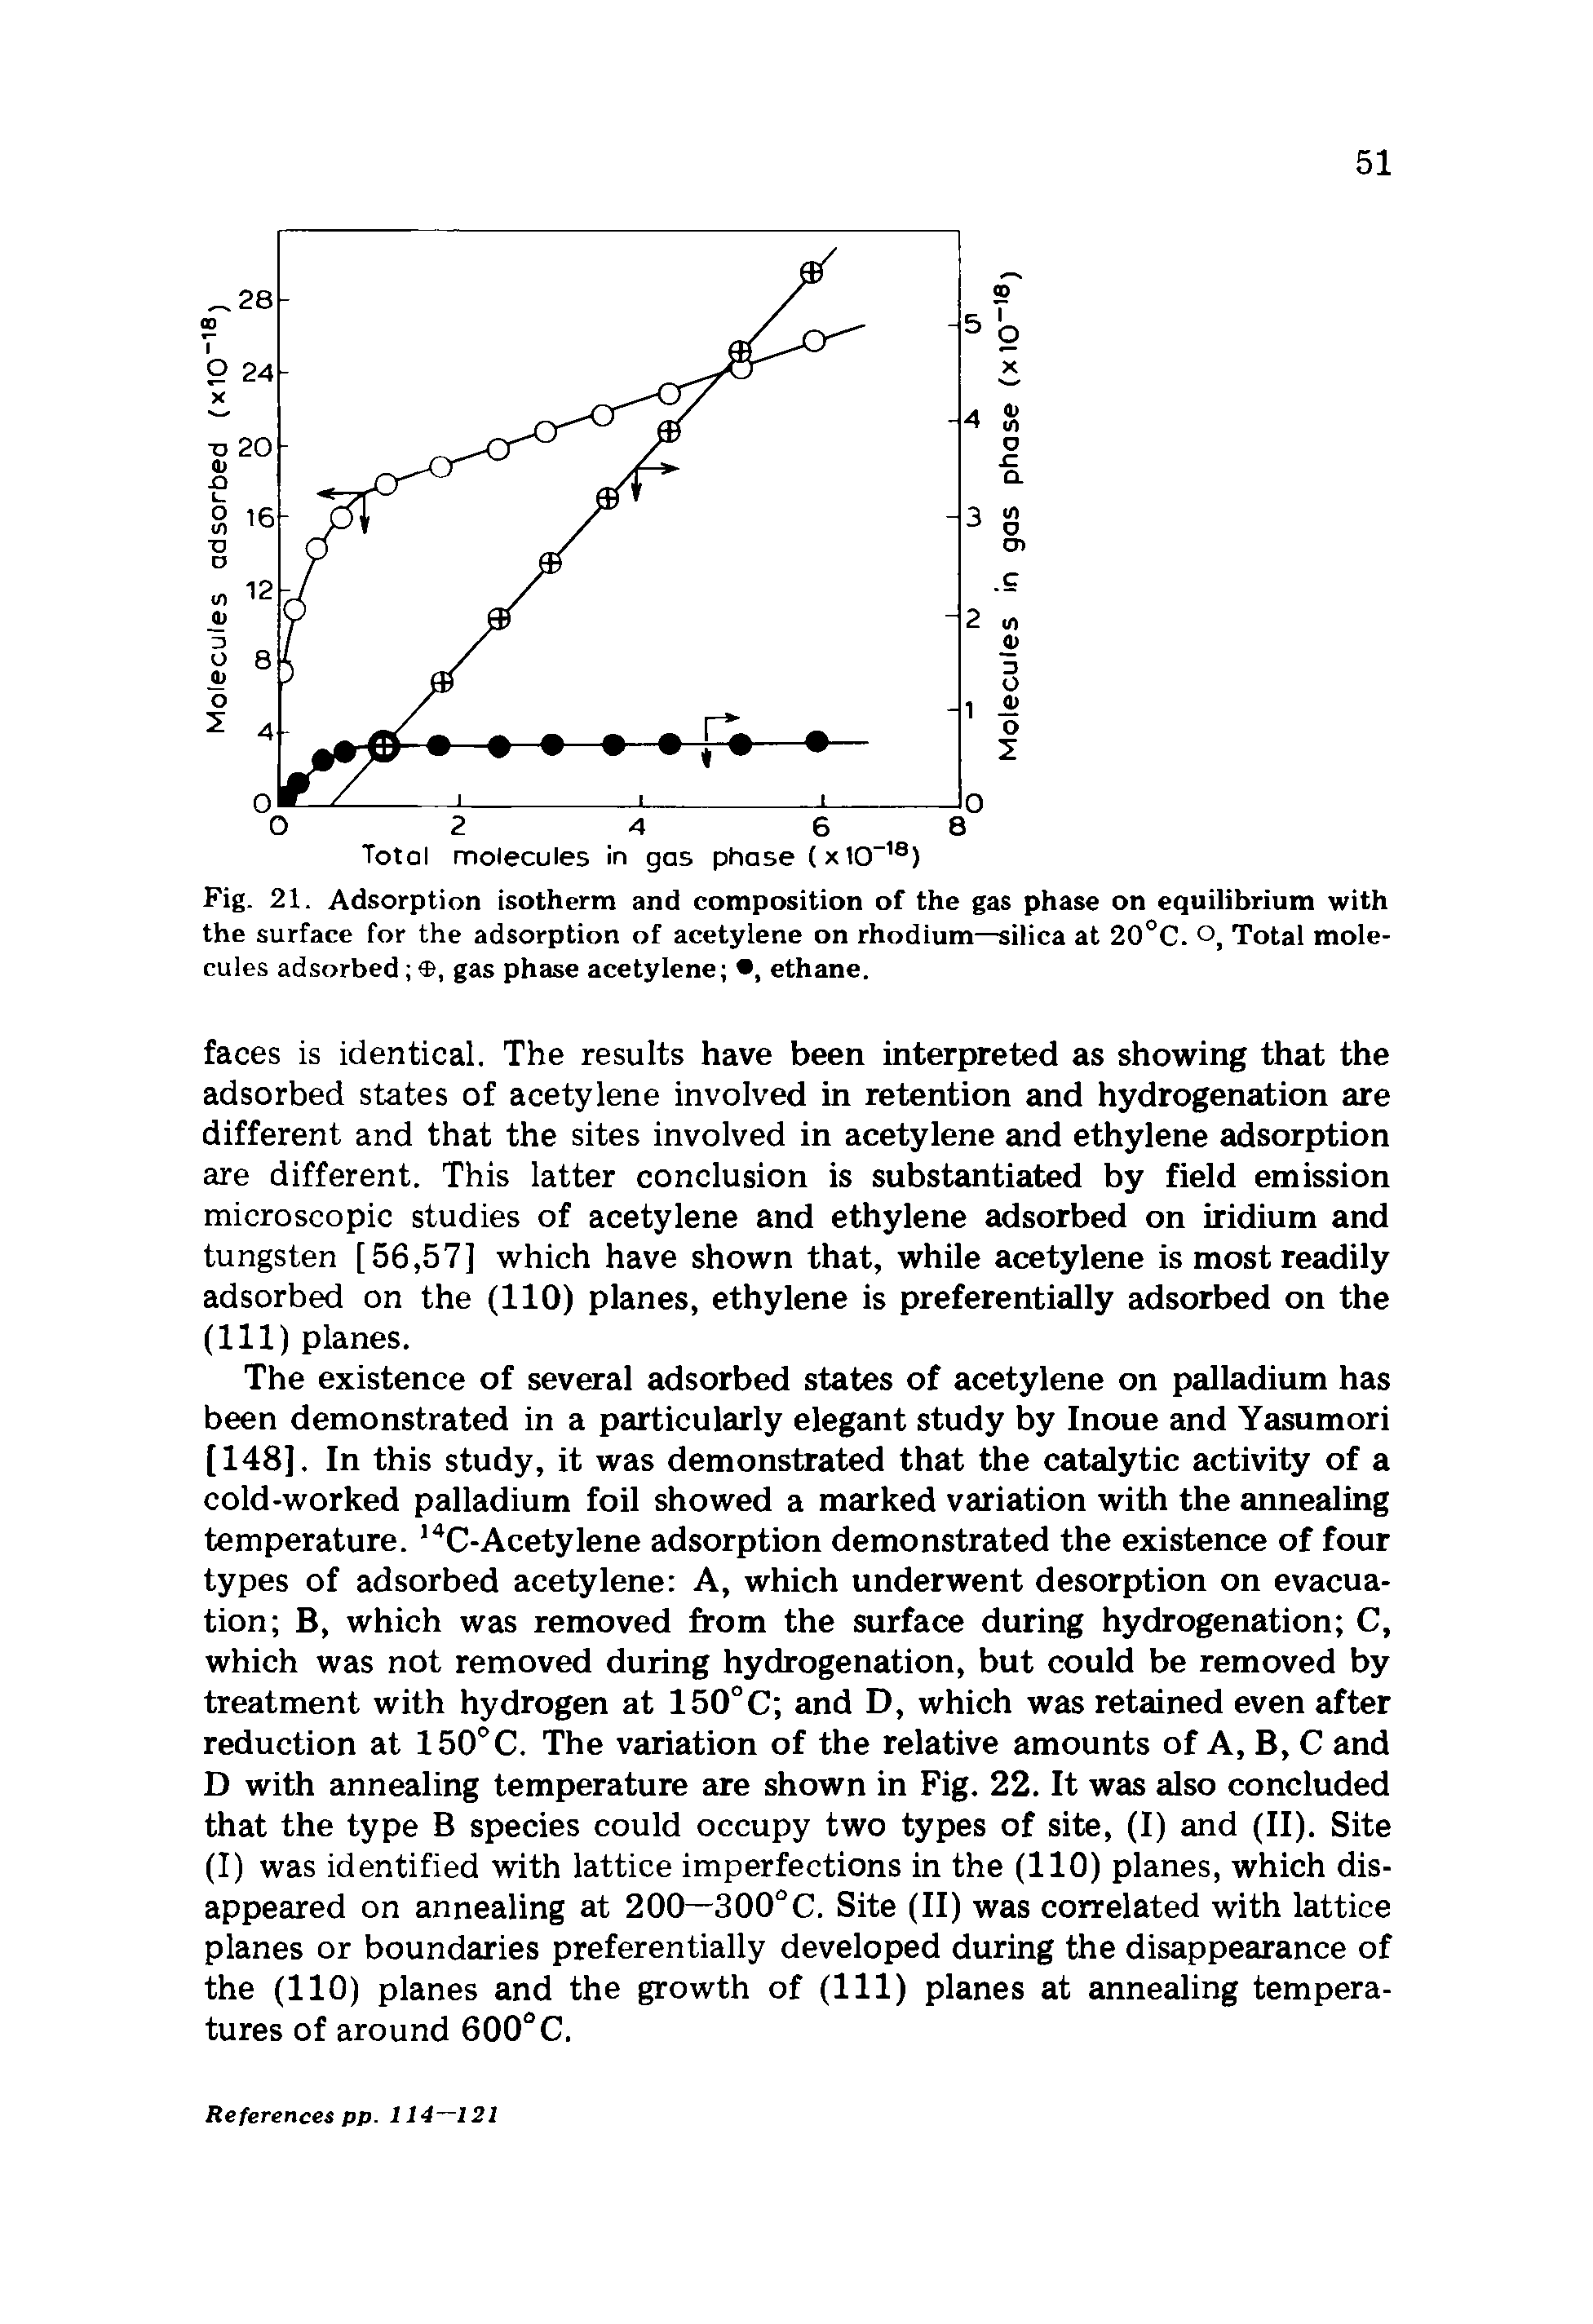 Fig. 21. Adsorption isotherm and composition of the gas phase on equilibrium with the surface for the adsorption of acetylene on rhodium—silica at 20°C. °, Total molecules adsorbed , gas phase acetylene , ethane.